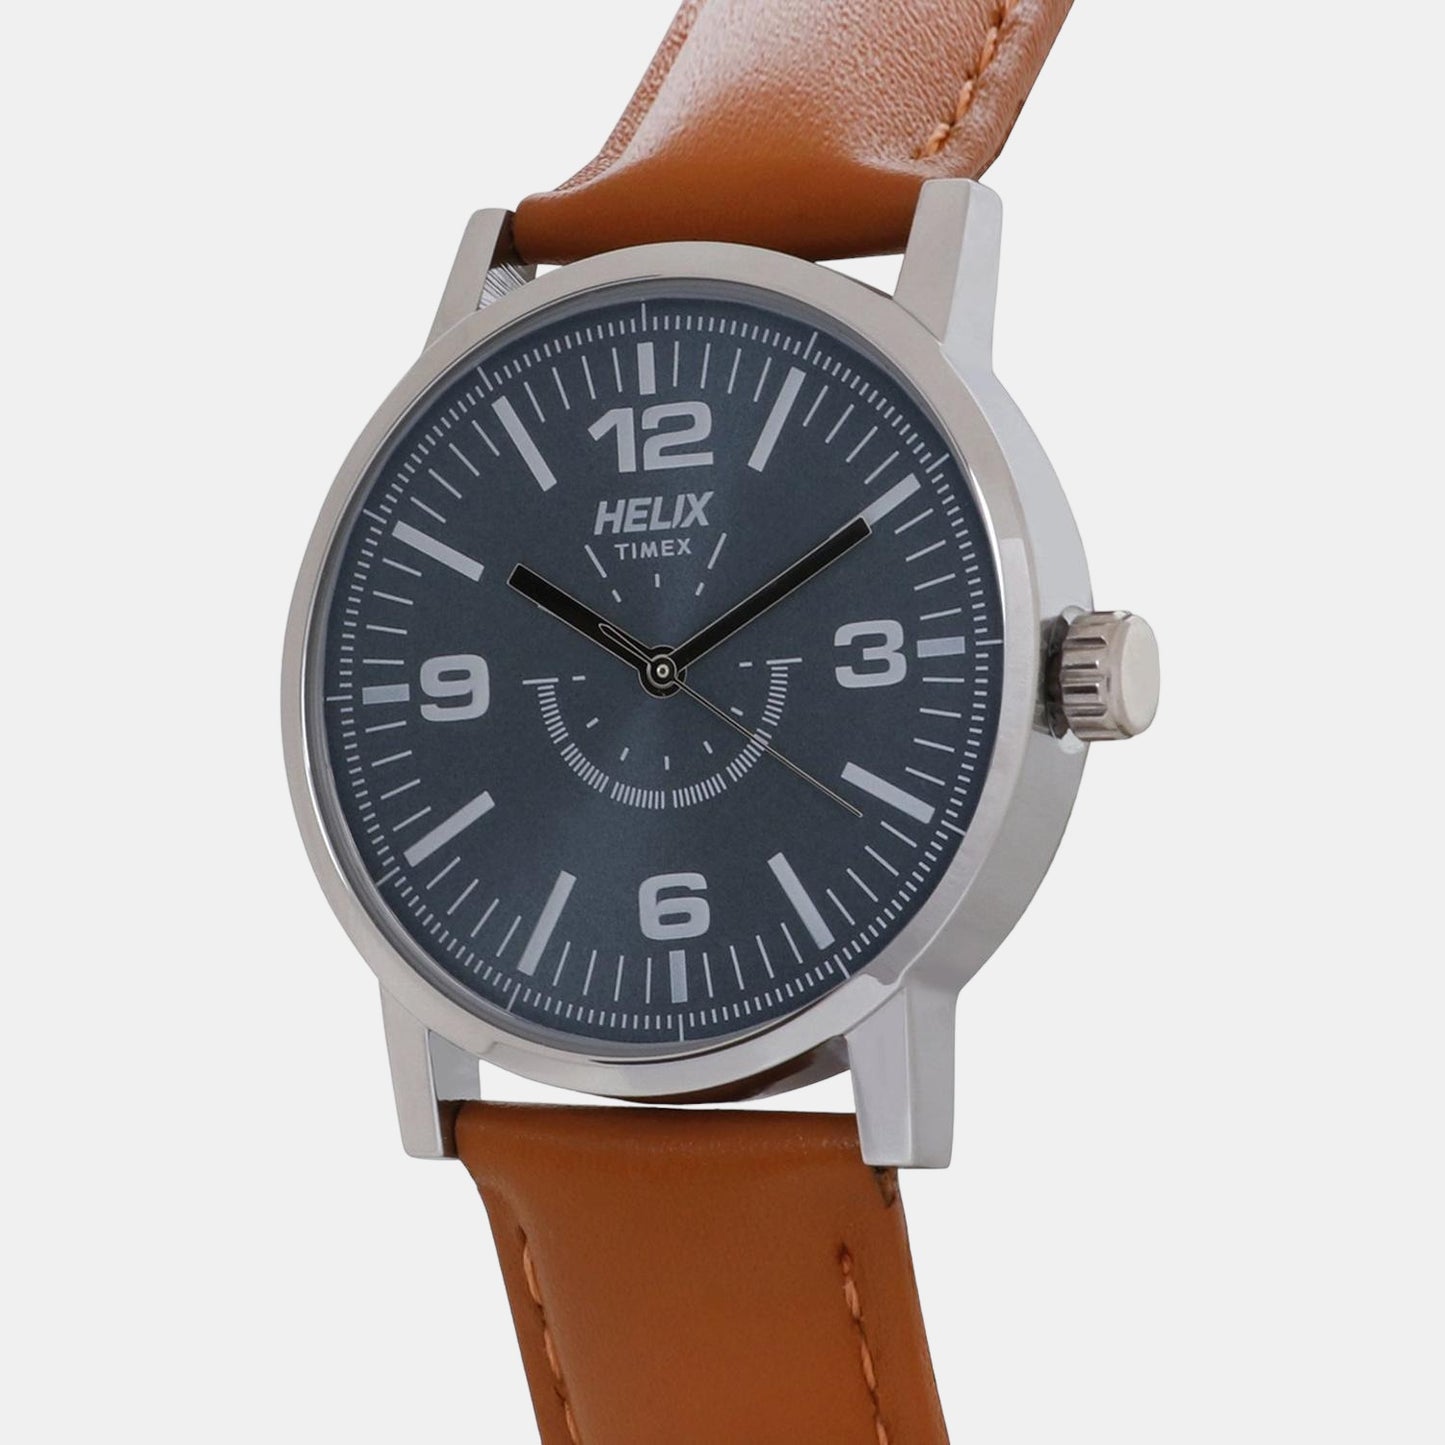 Male Blue Analog Leather Watch TW035HG02